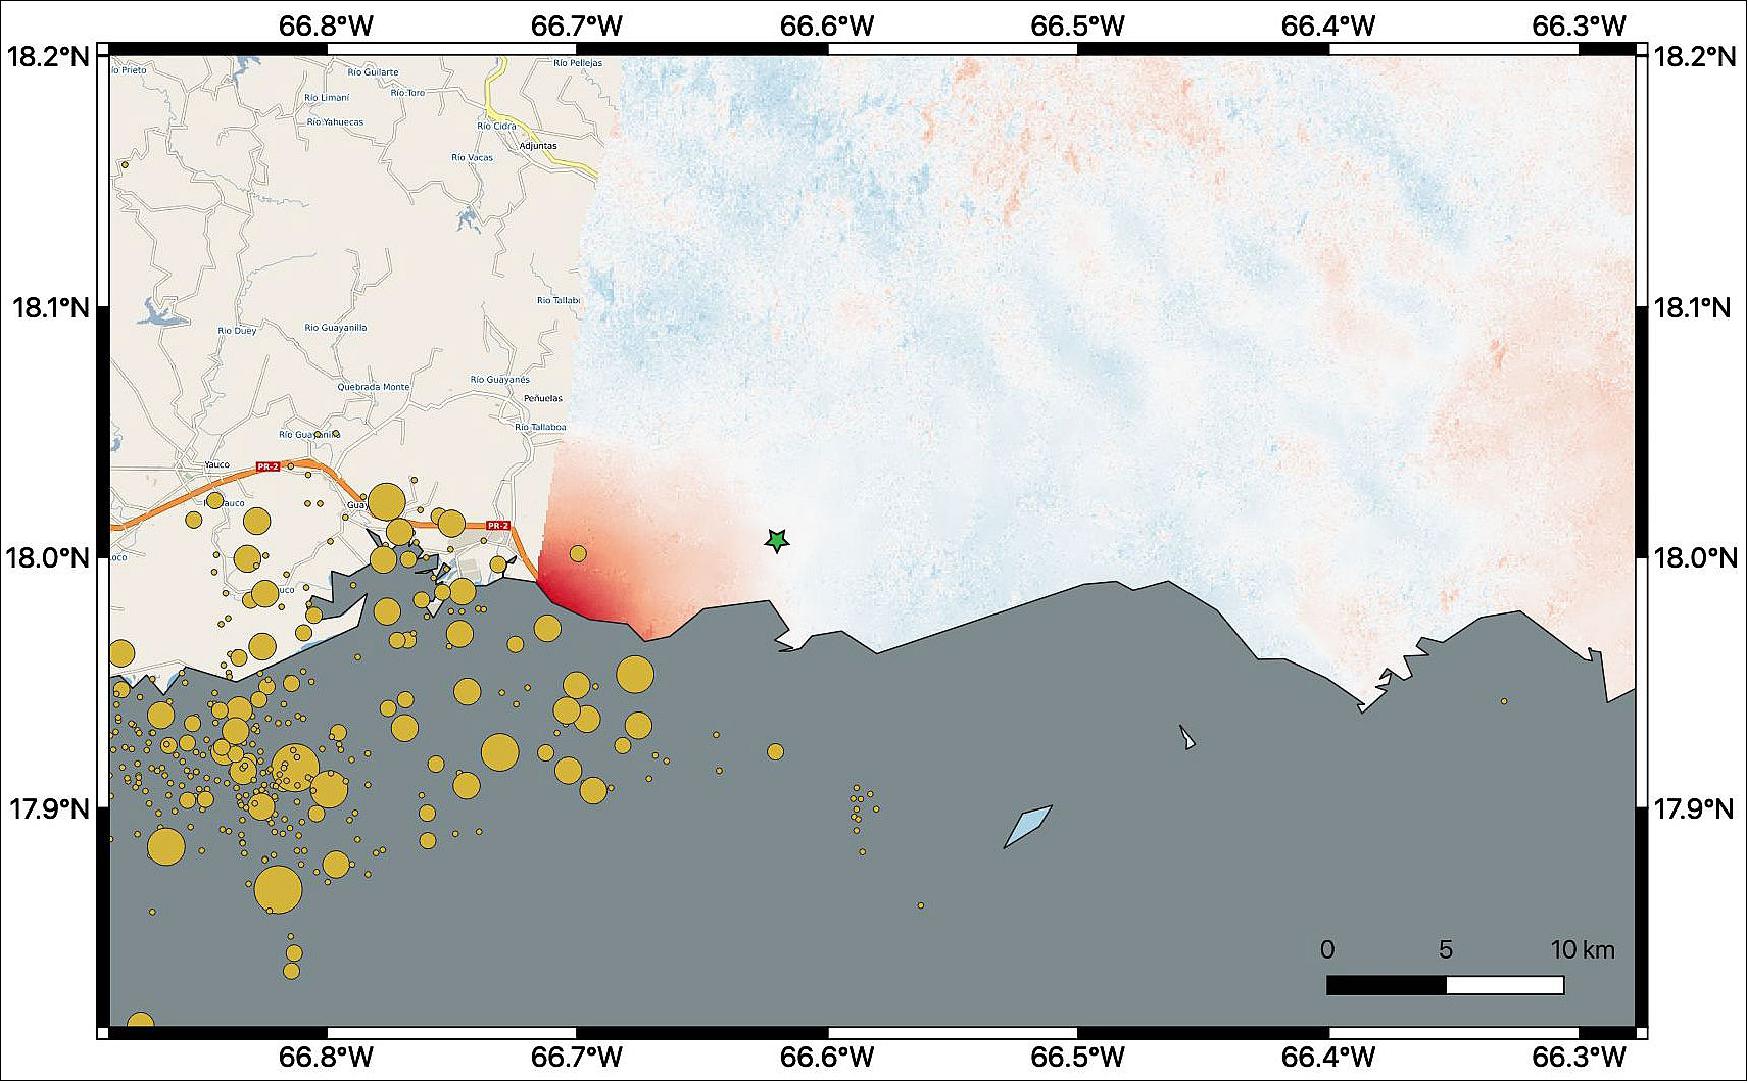 Figure 30: This map shows ground changes, or displacement, on the eastern two-thirds of Puerto Rico following a 6.4-magnitude earthquake. The ground shifted up to 5.5 inches (14 cm) in a downward and slightly west direction (image credit: NASA/JPL-Caltech, ESA, USGS)